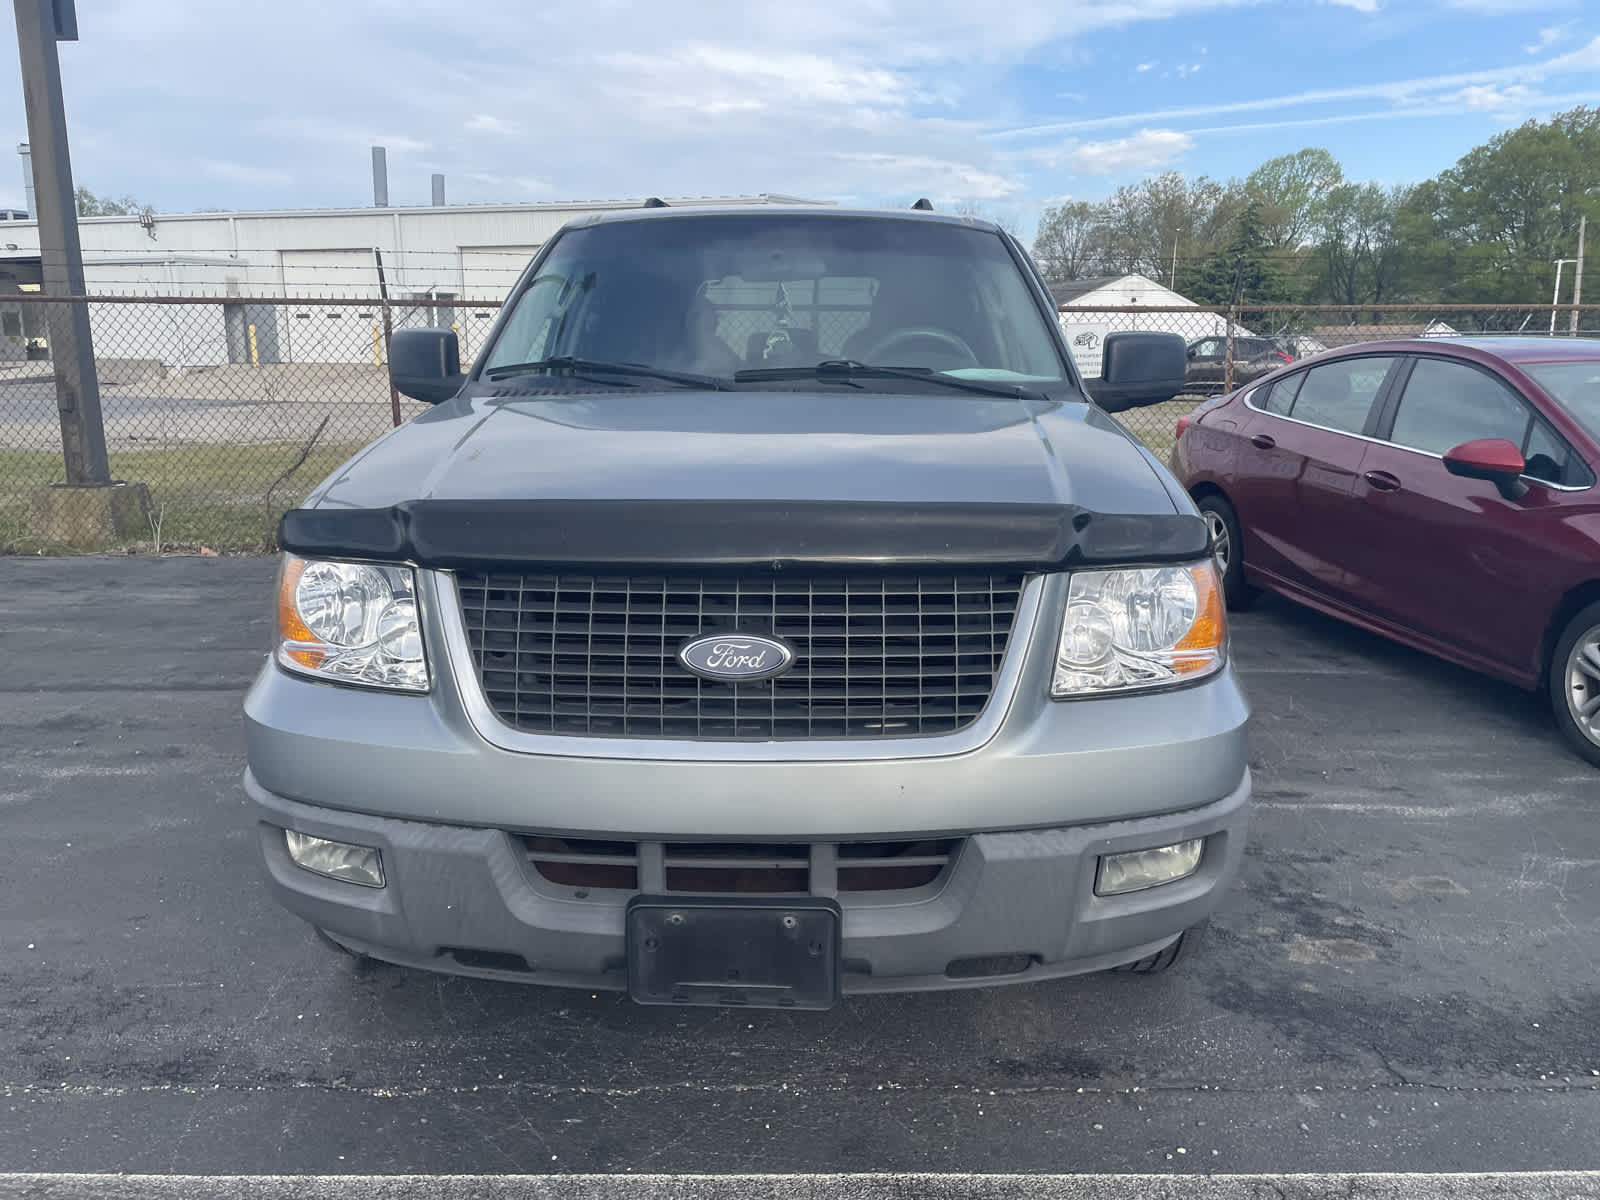 Used 2006 Ford Expedition XLT with VIN 1FMPU15556LA82422 for sale in Dover, DE